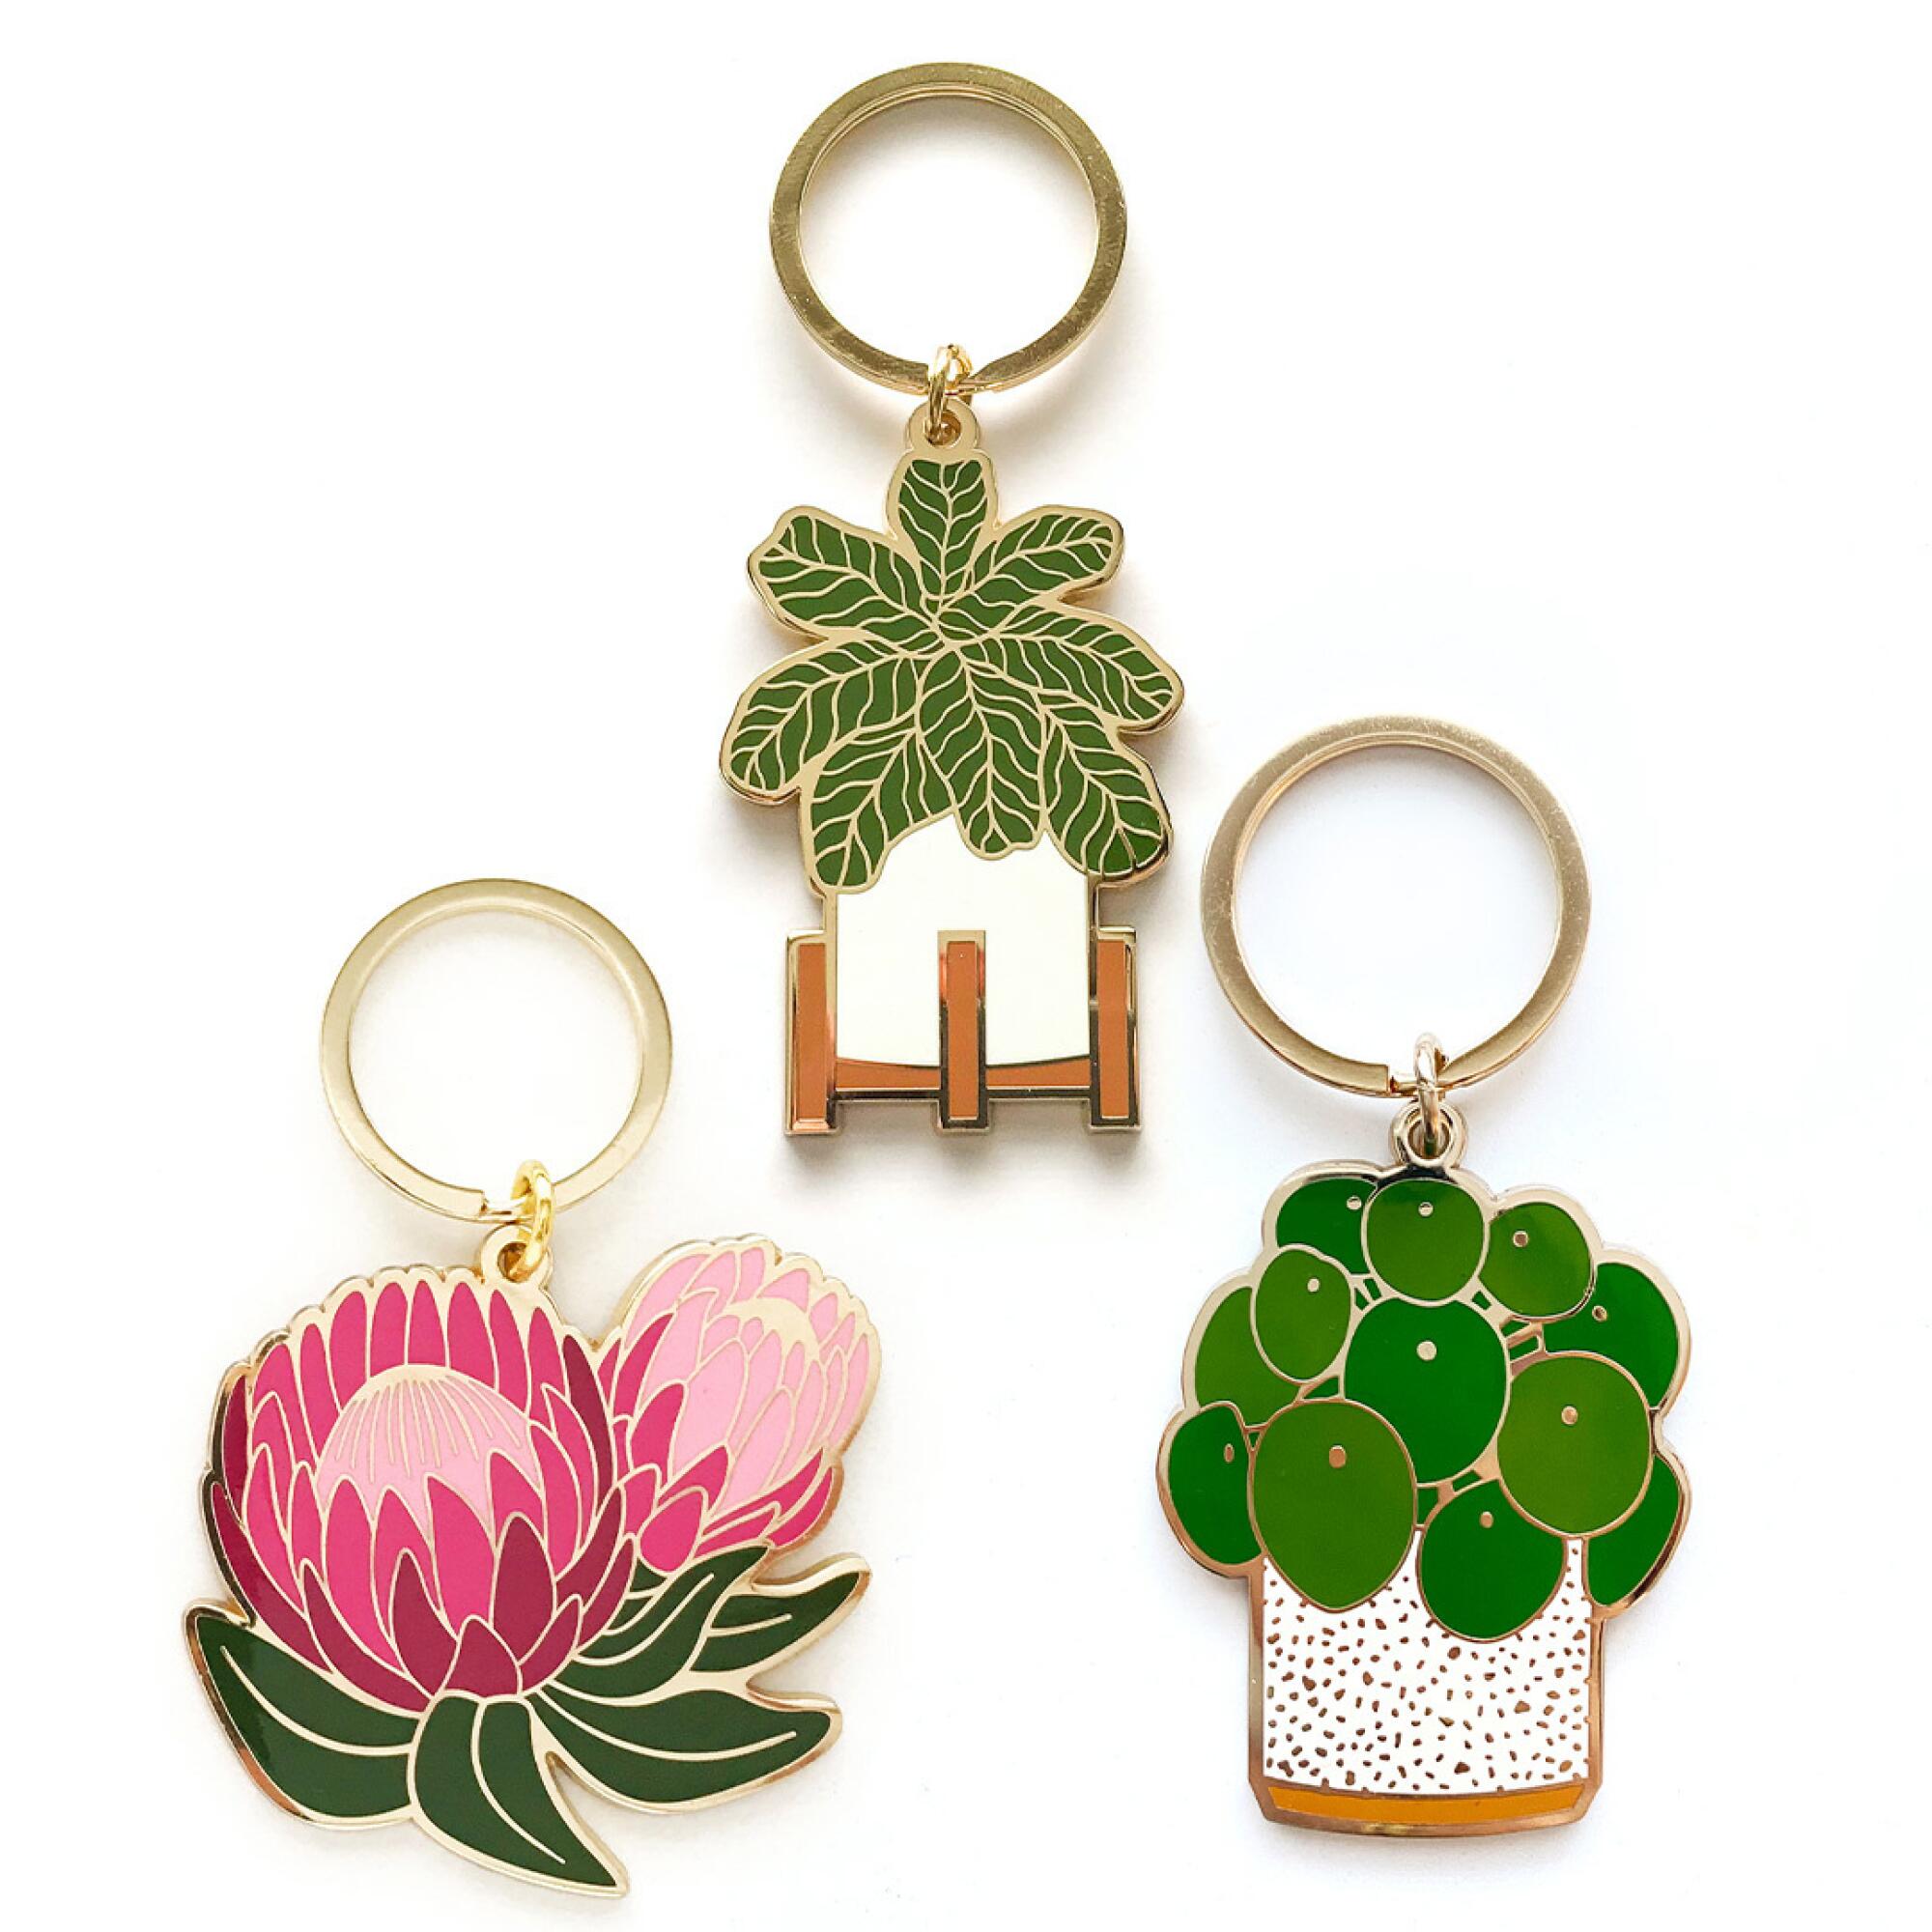 Paper Anchor Co. enamel keychains like pilea plants and more.